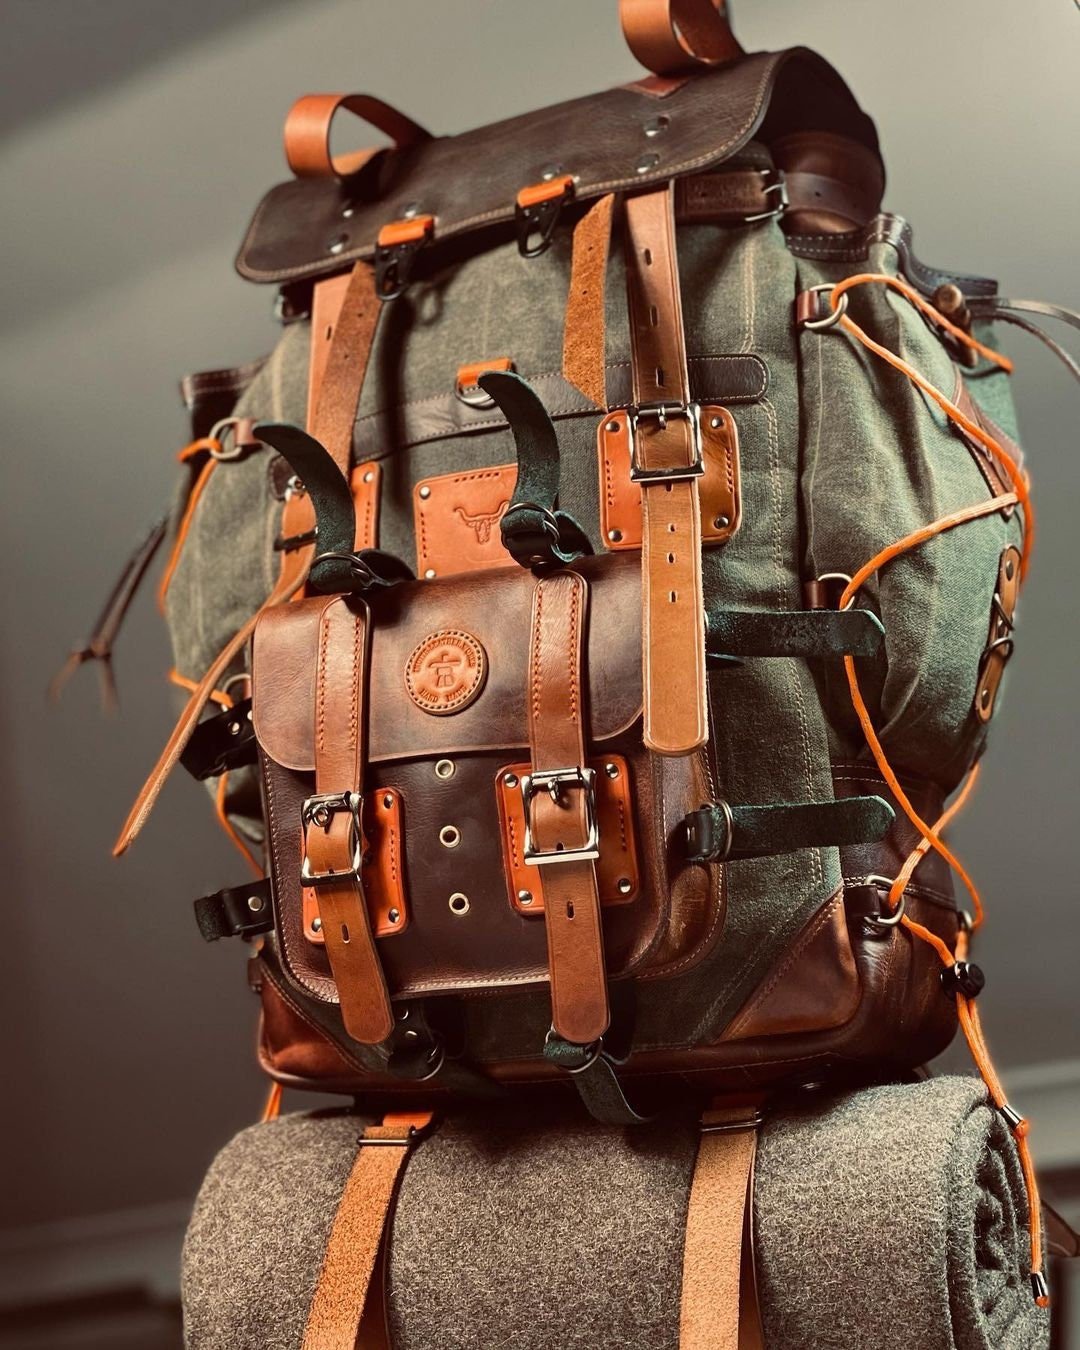 200USD Discount | Bushcraft Design Finalist | Handmade Leather and Canvas  Backpack for Travel, Camping,Military | 45 Liter | Personalization